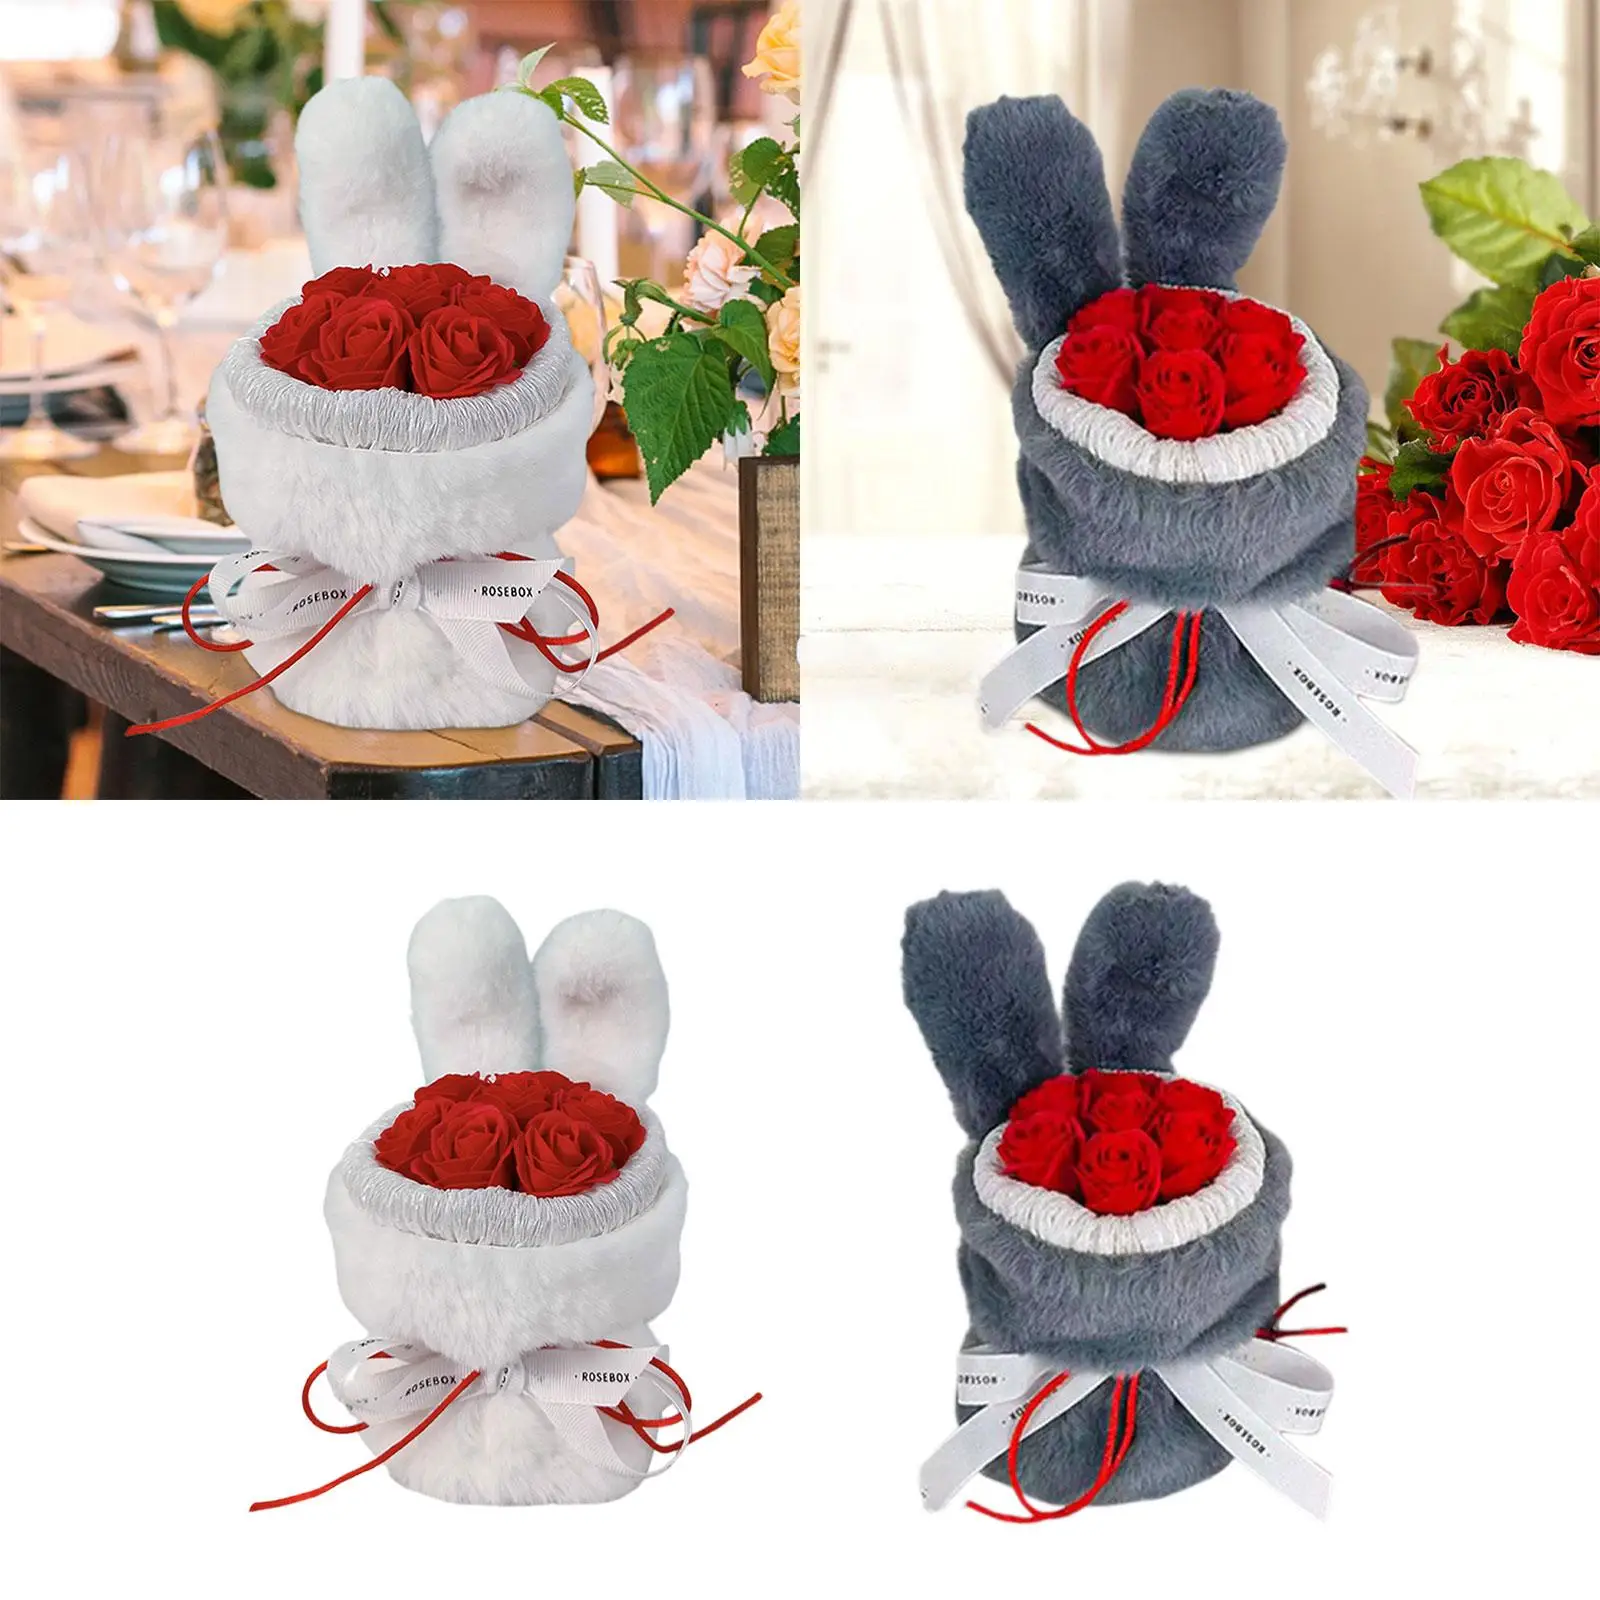 Soap Rose Flower Bath Soap rabbit Shaped Artificial Flower Bouquet for Birthday Wedding Party mother Day Decoration